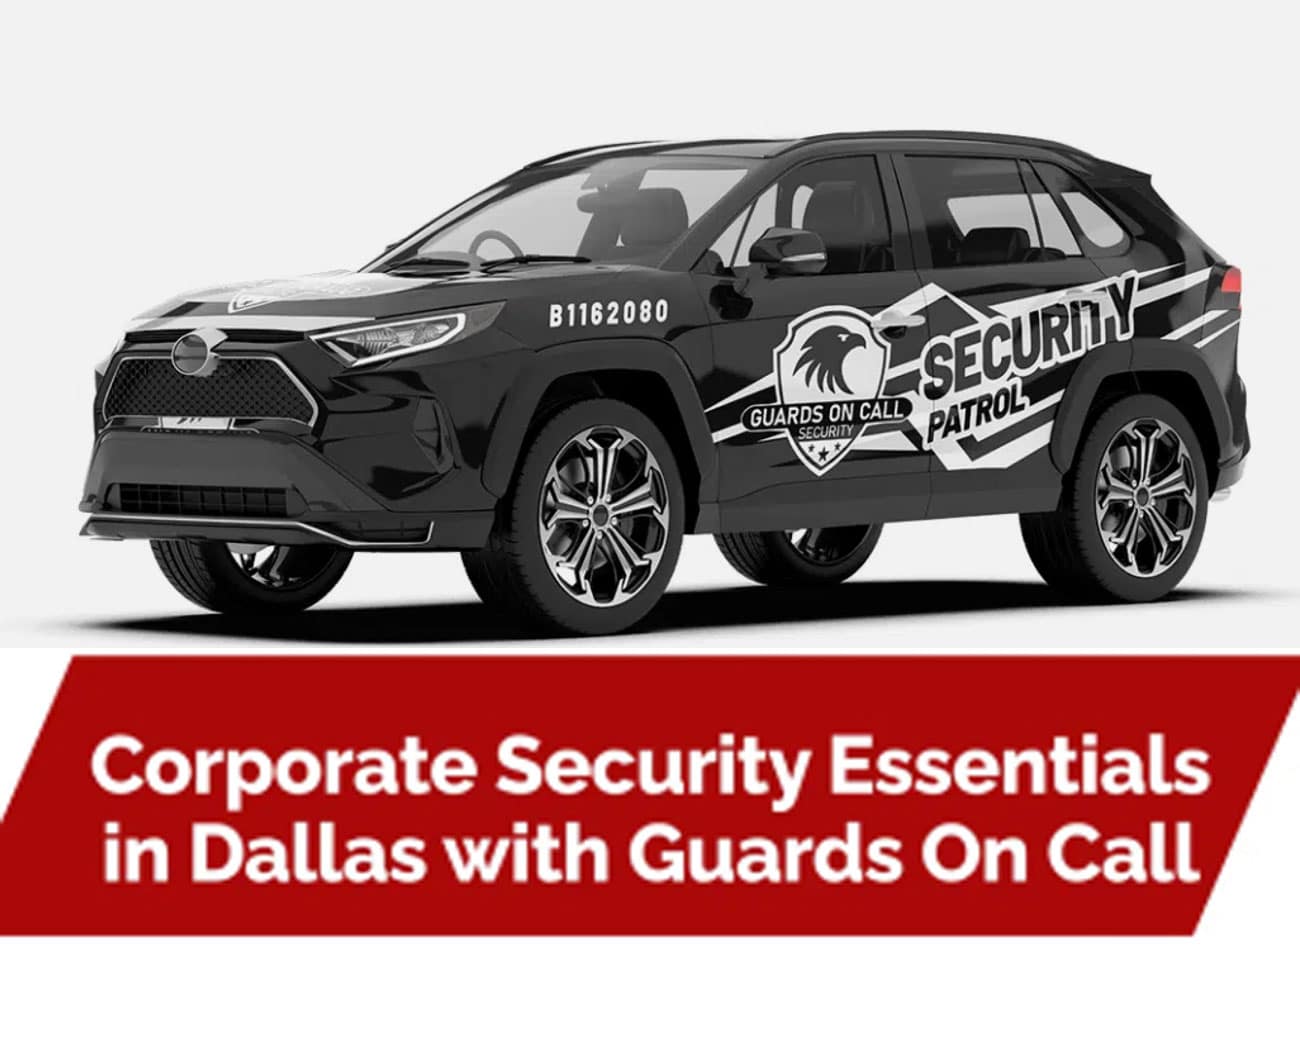 Corporate Security Essentials in Dallas with Guards On Call